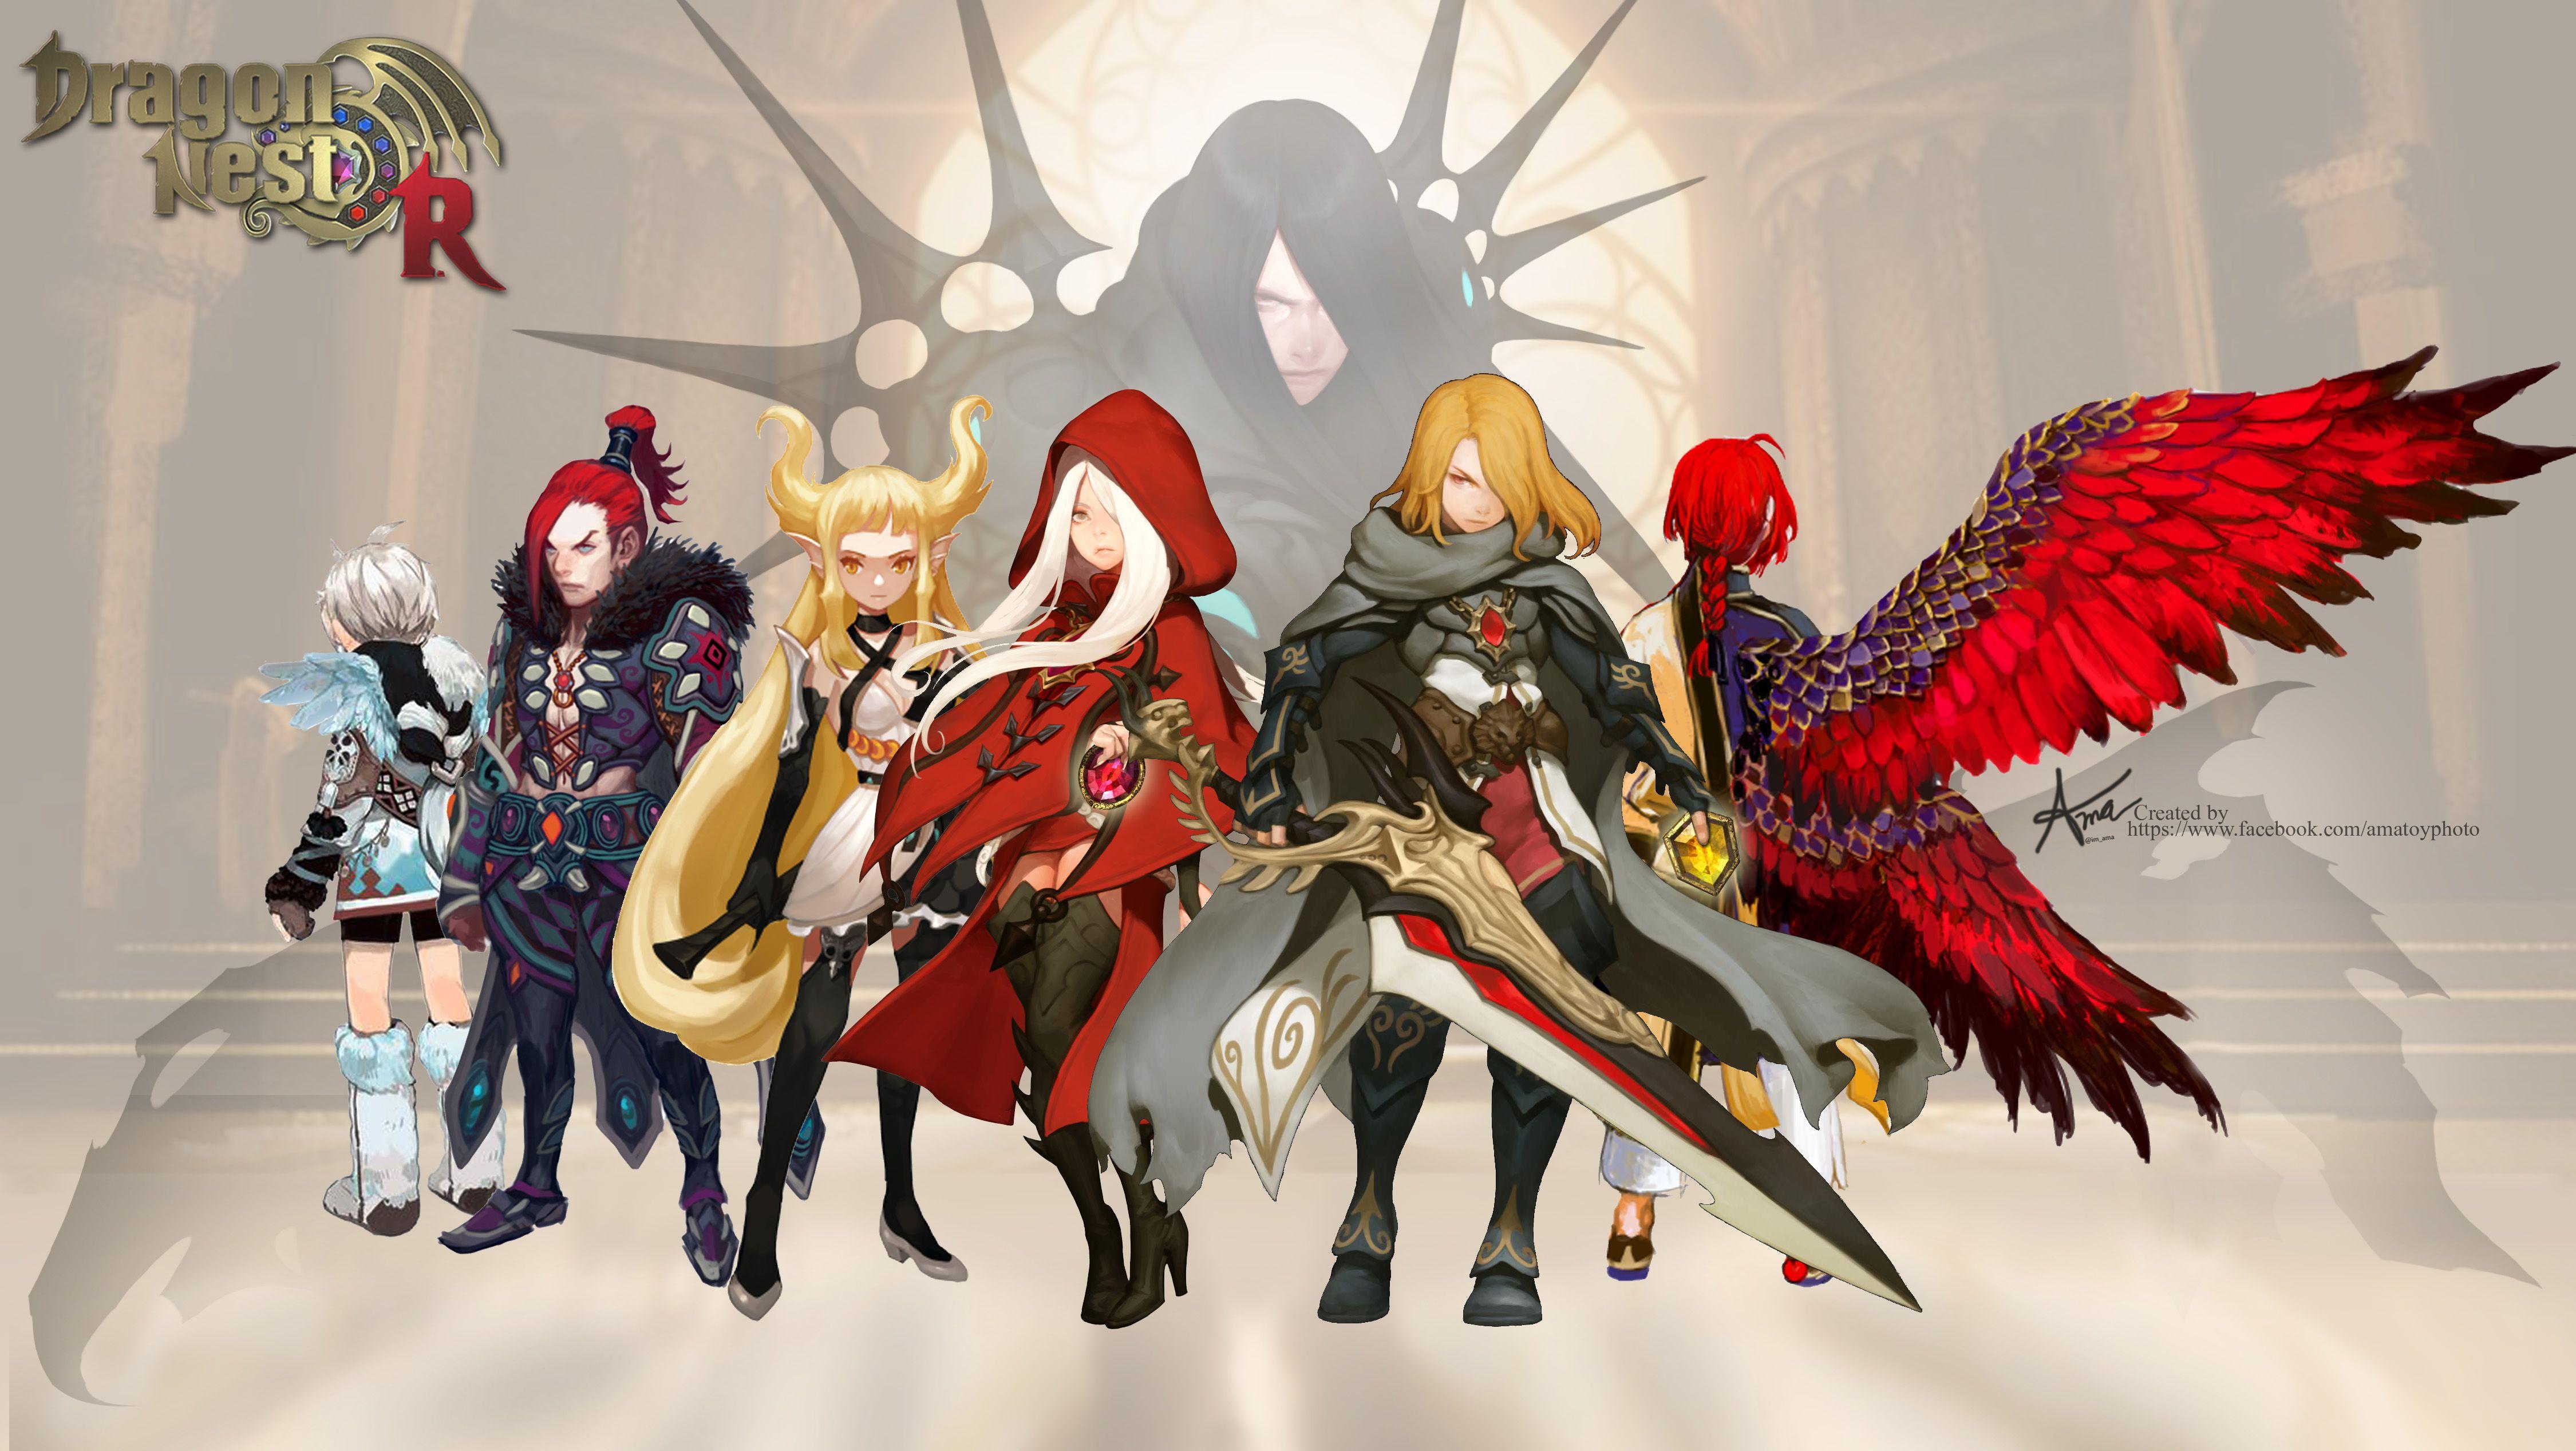 Wallpaper Dragon Nest All Dragons By Ama Toyphoto